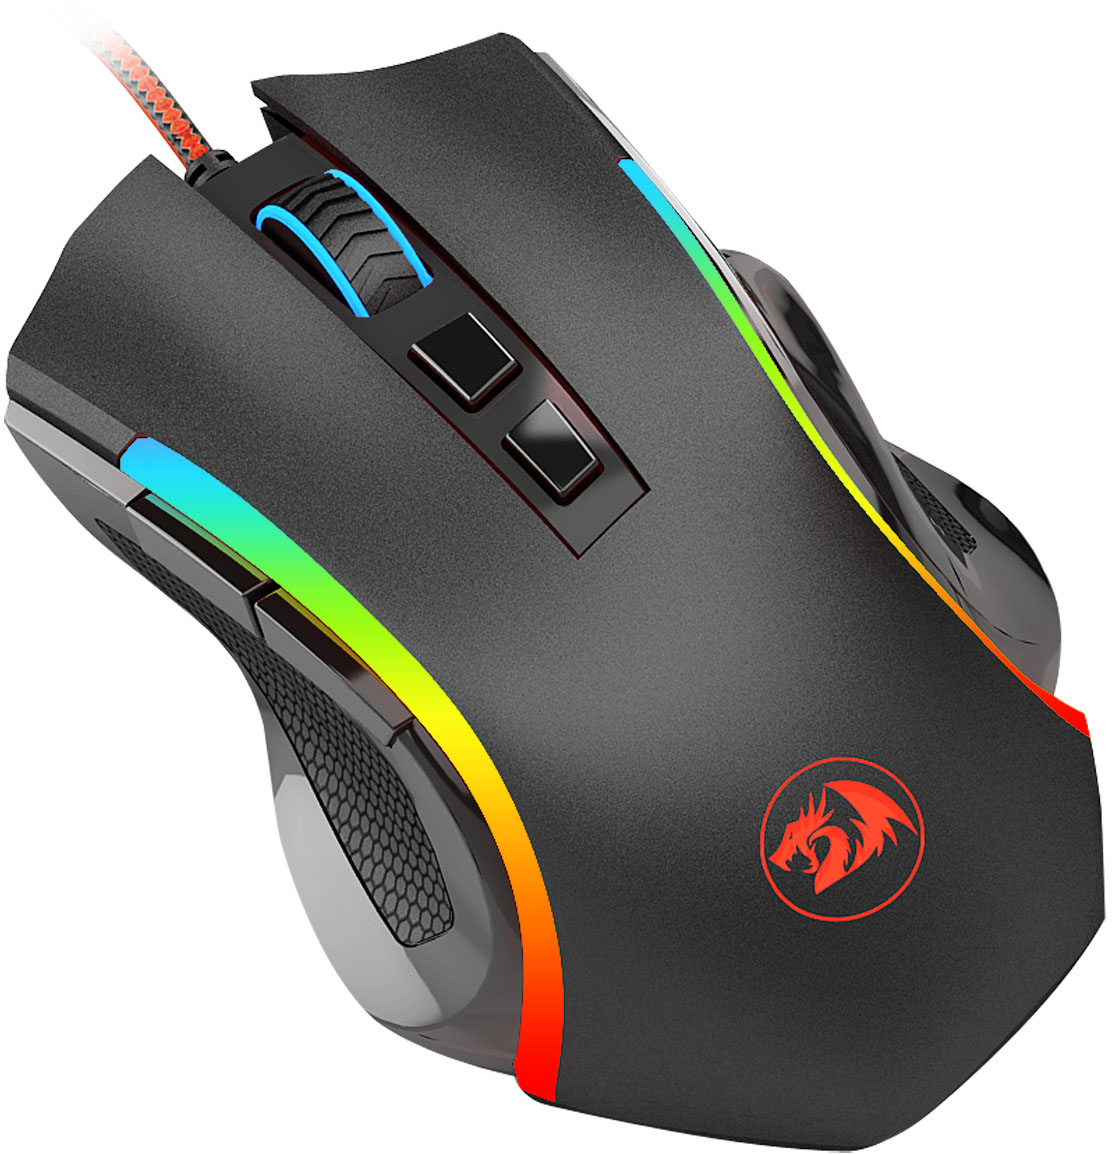 Angle View: REDRAGON - COBRA M711 Wired Optical Gaming Mouse - Black